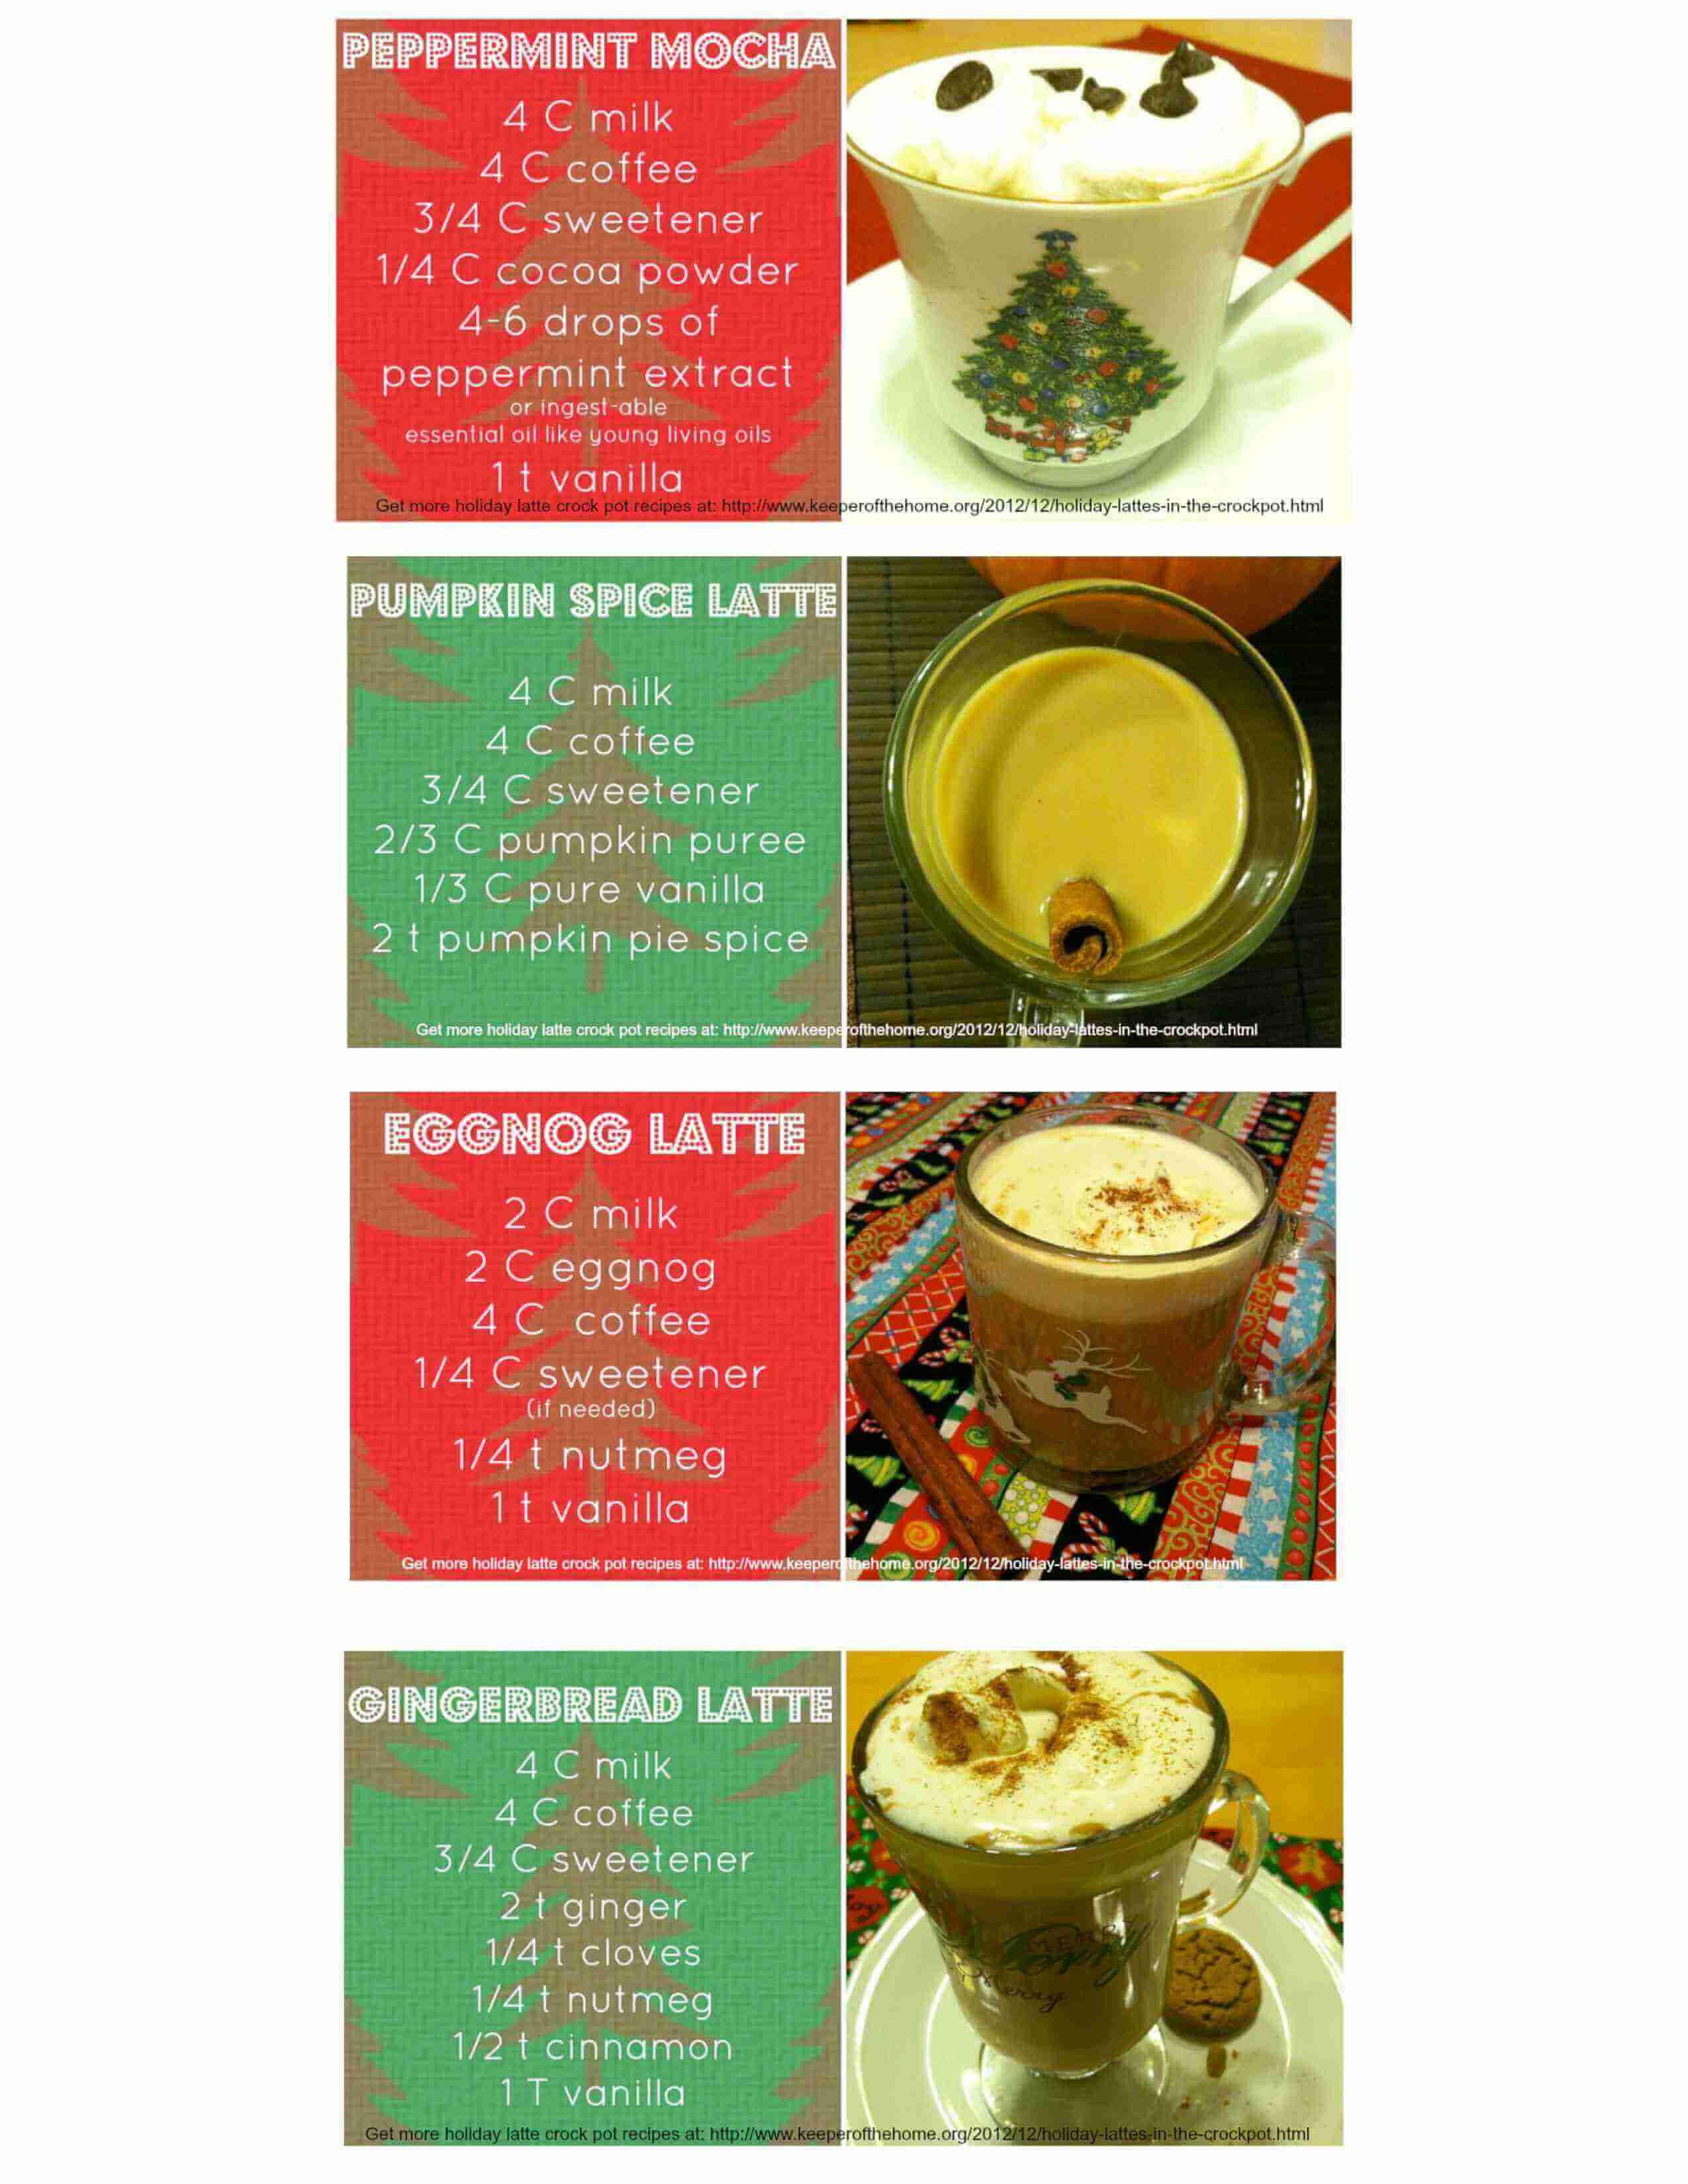 Did you know you can actually make holiday lattes in the crock pot?! My personal latte favorites are gingerbread, eggnog, peppermint mocha and pumpkin spice – here's the recipes. These really are very simple to make at home, and you’ll know your delicious hot beverage is made with real ingredients.